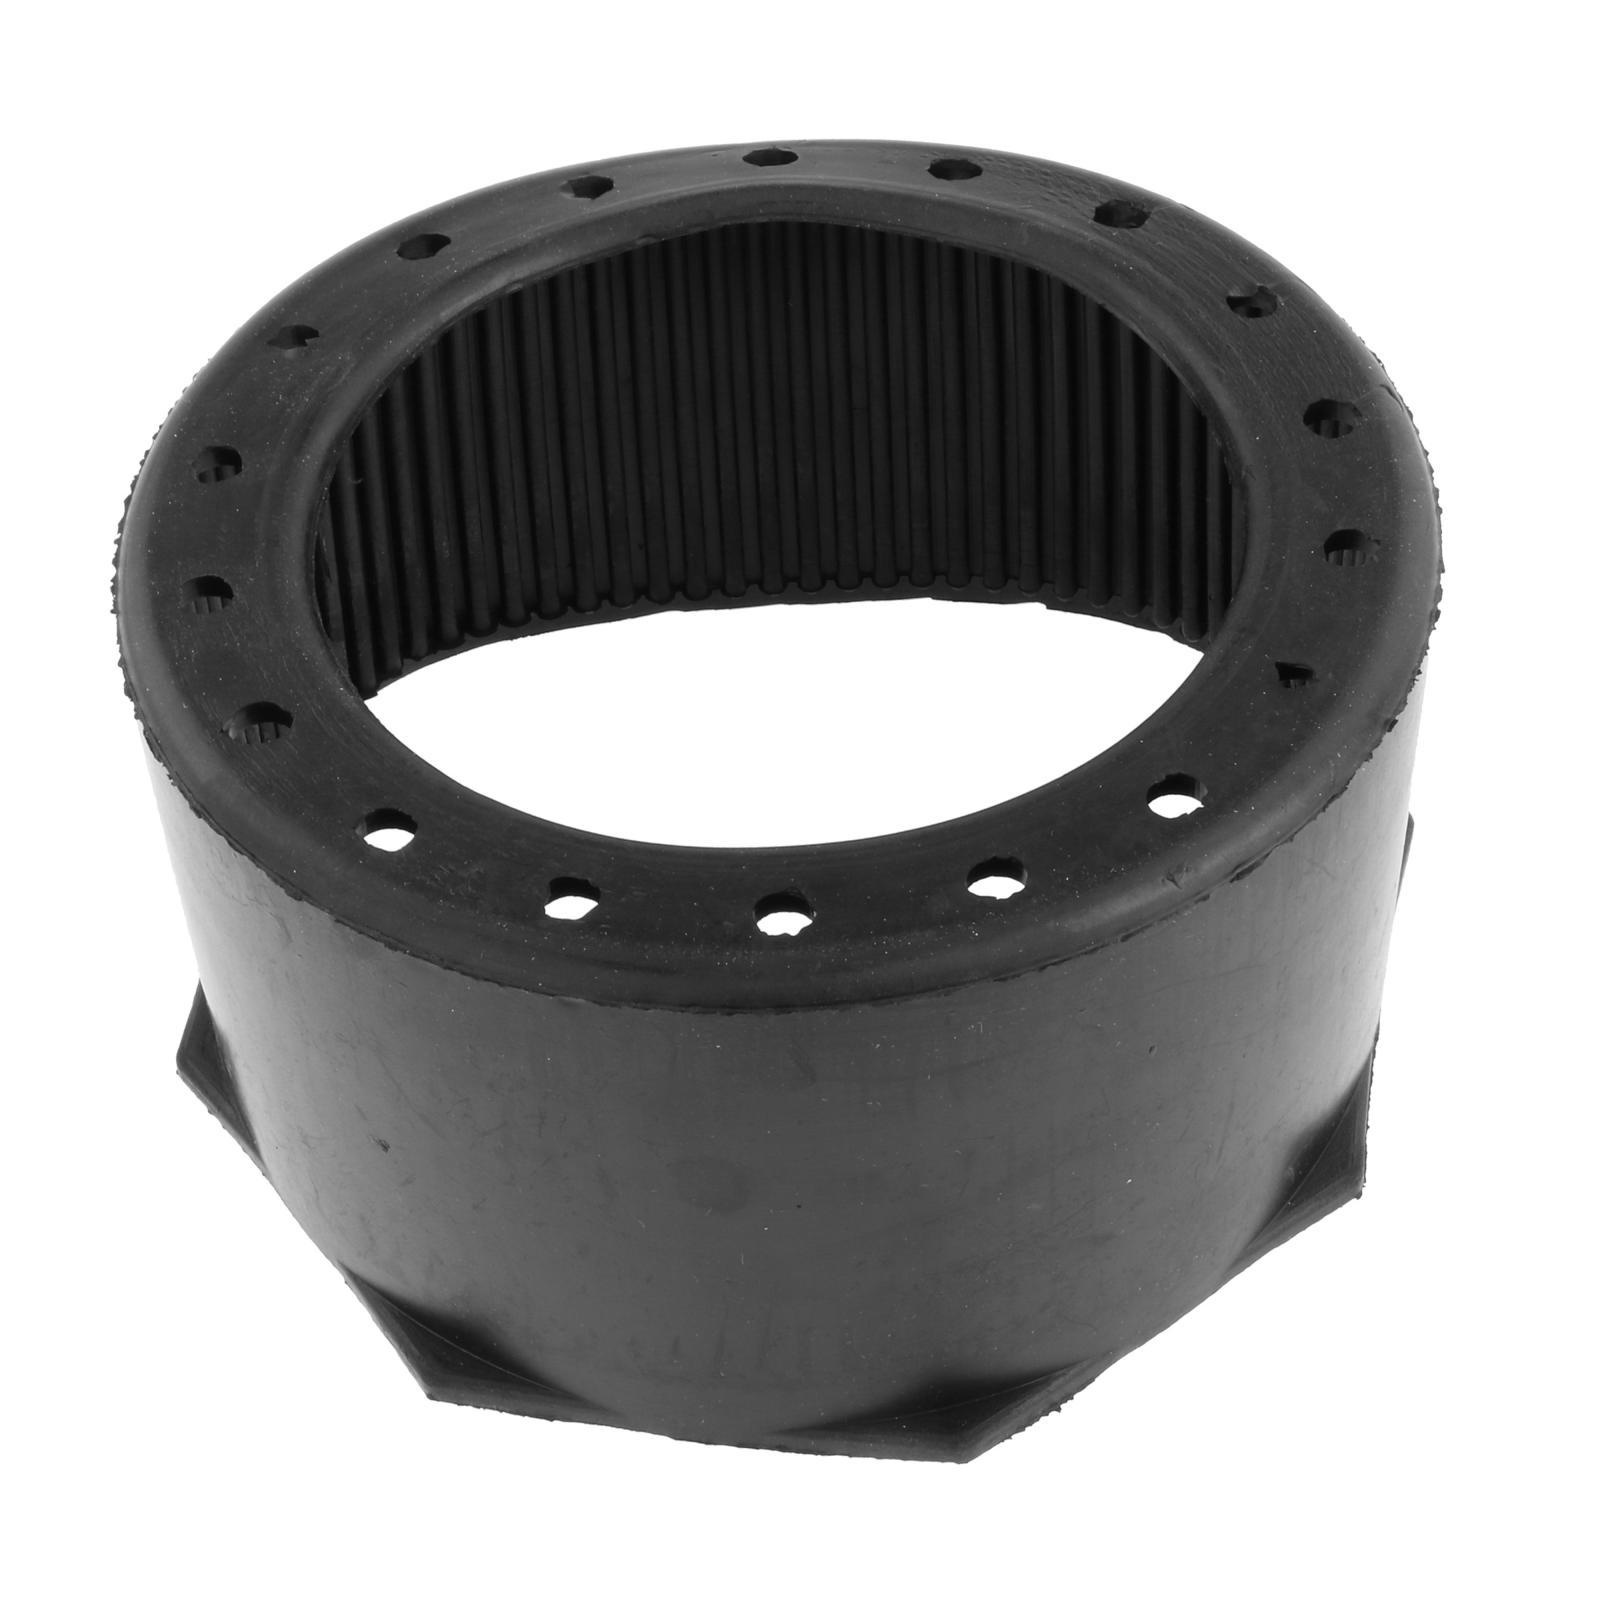 Trident Tank Boot Rubber 7.25" Alum Cylinder